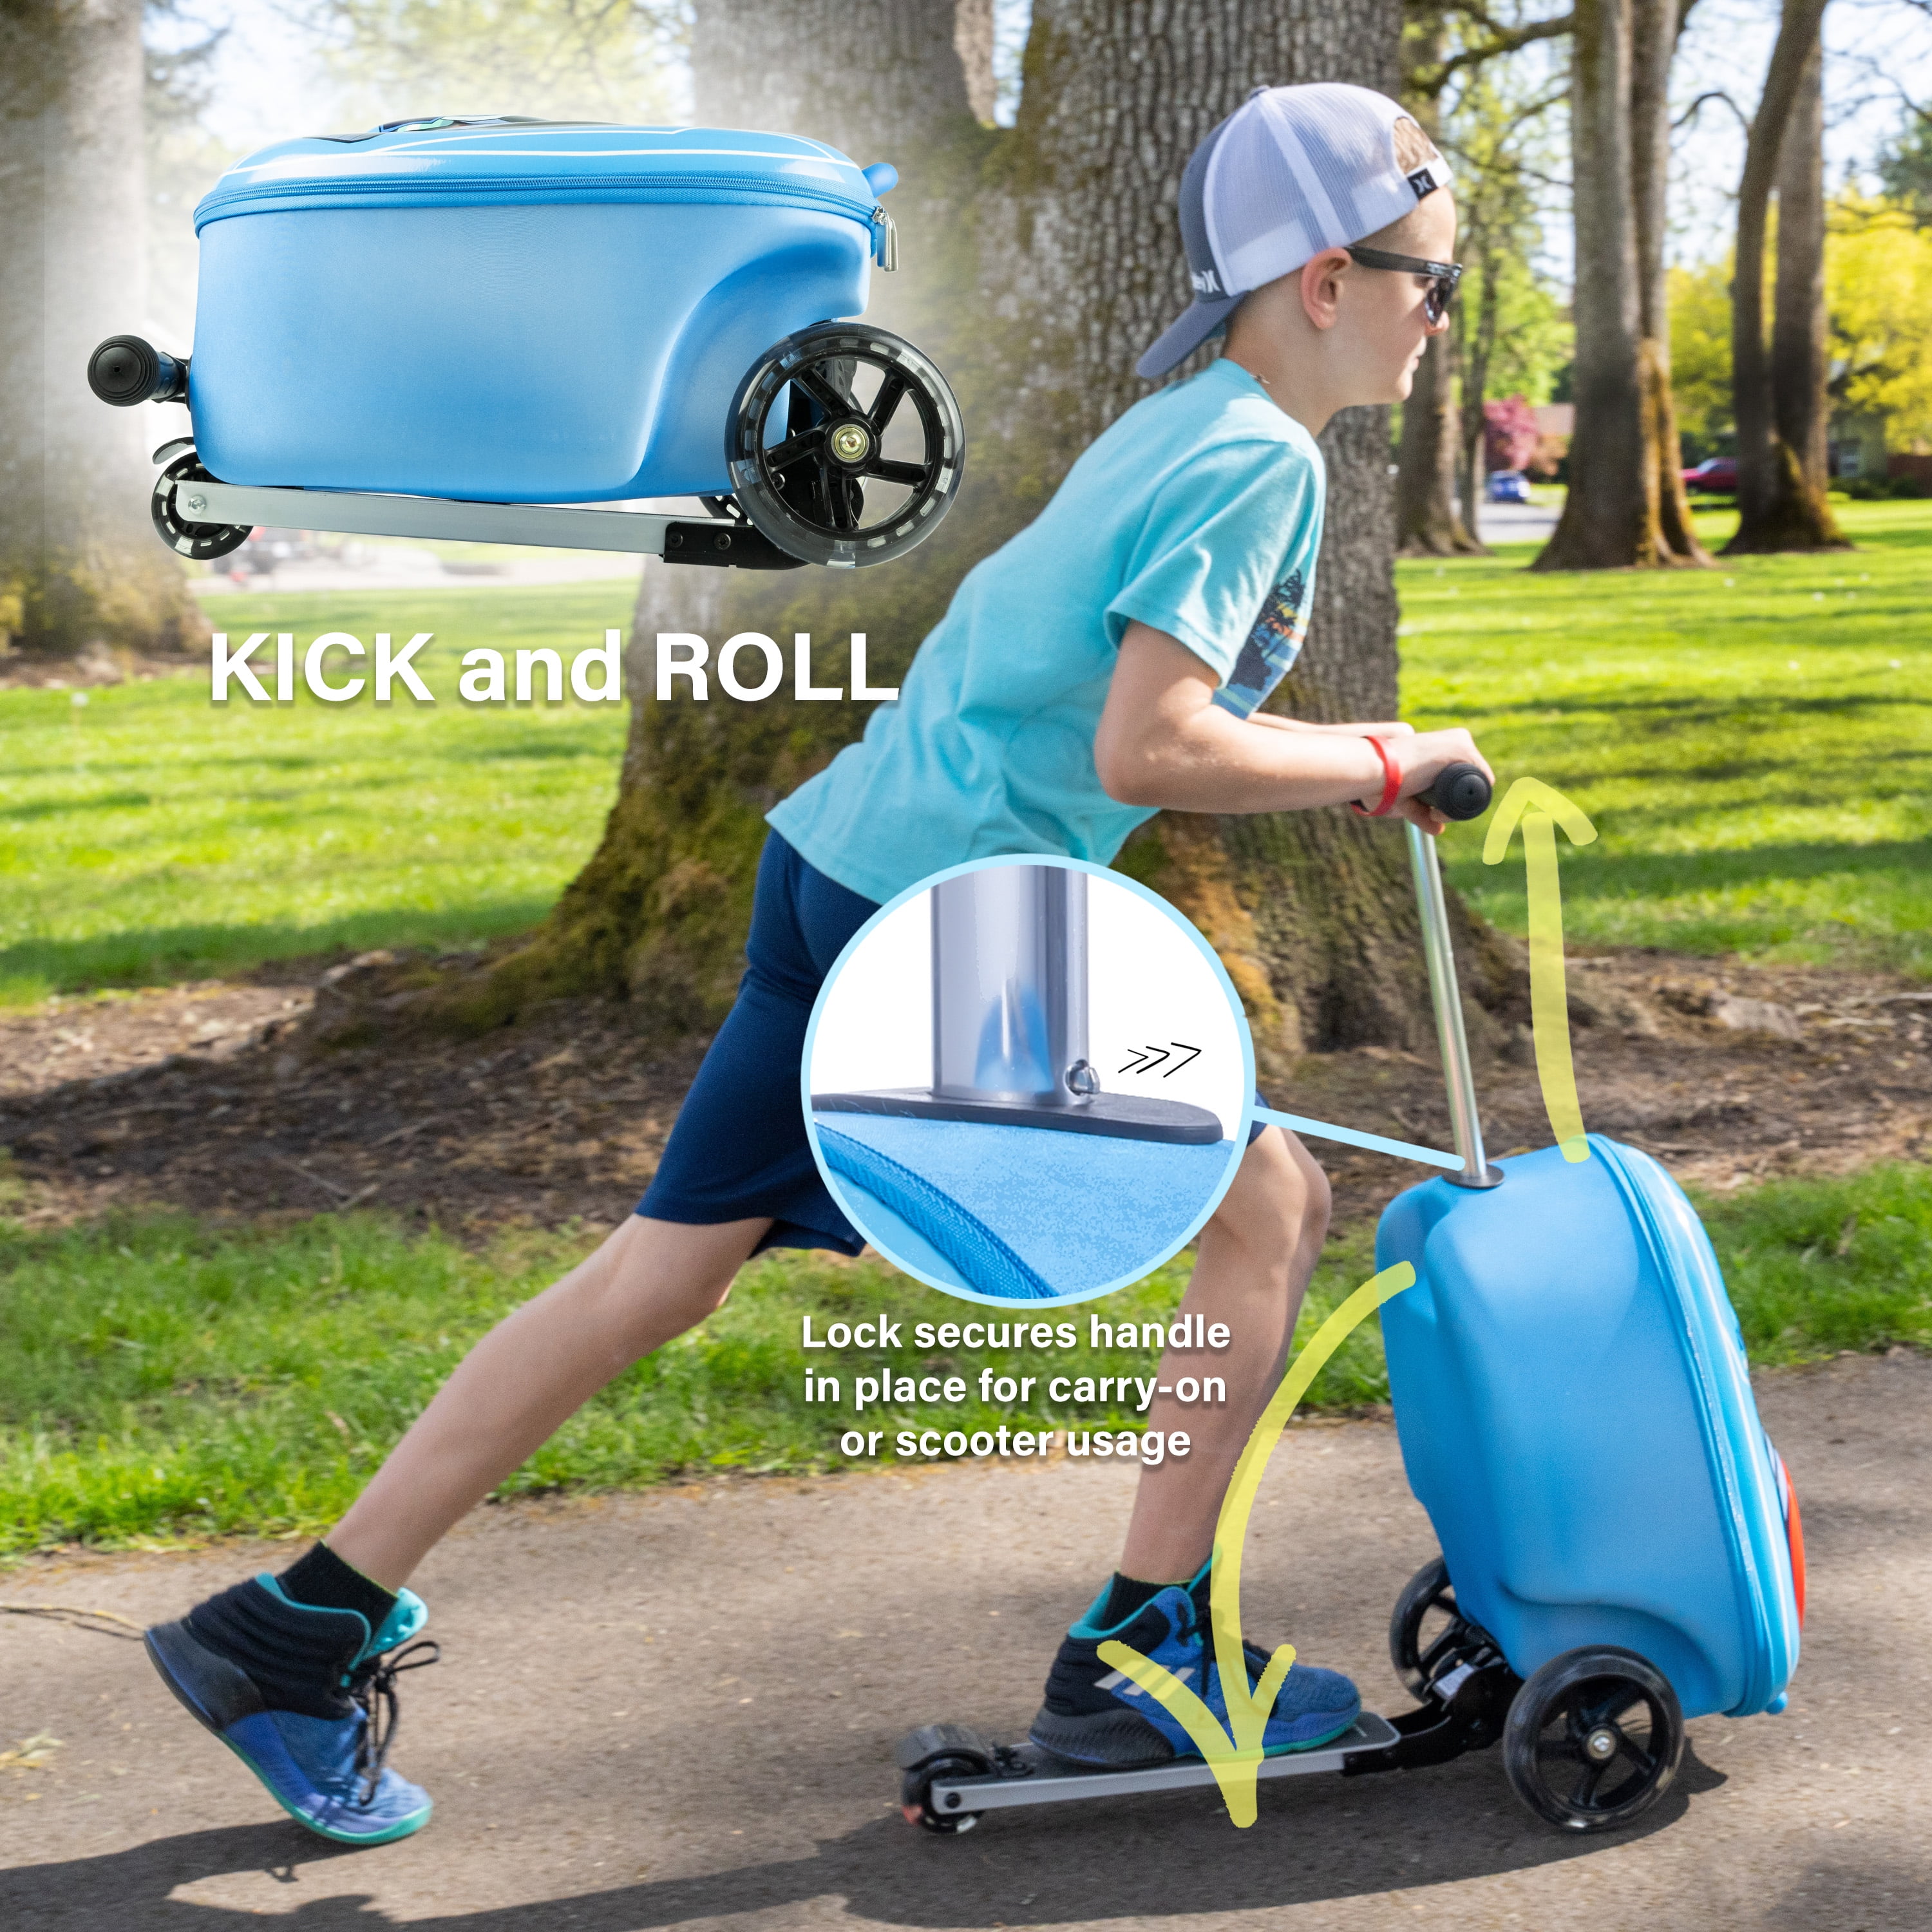 KIDDIETOTES 3-D Hardshell Ride On Suitcase Scooter for Kids - Cute  Lightweight Kids Luggage with Wheels - Fun LED Lights